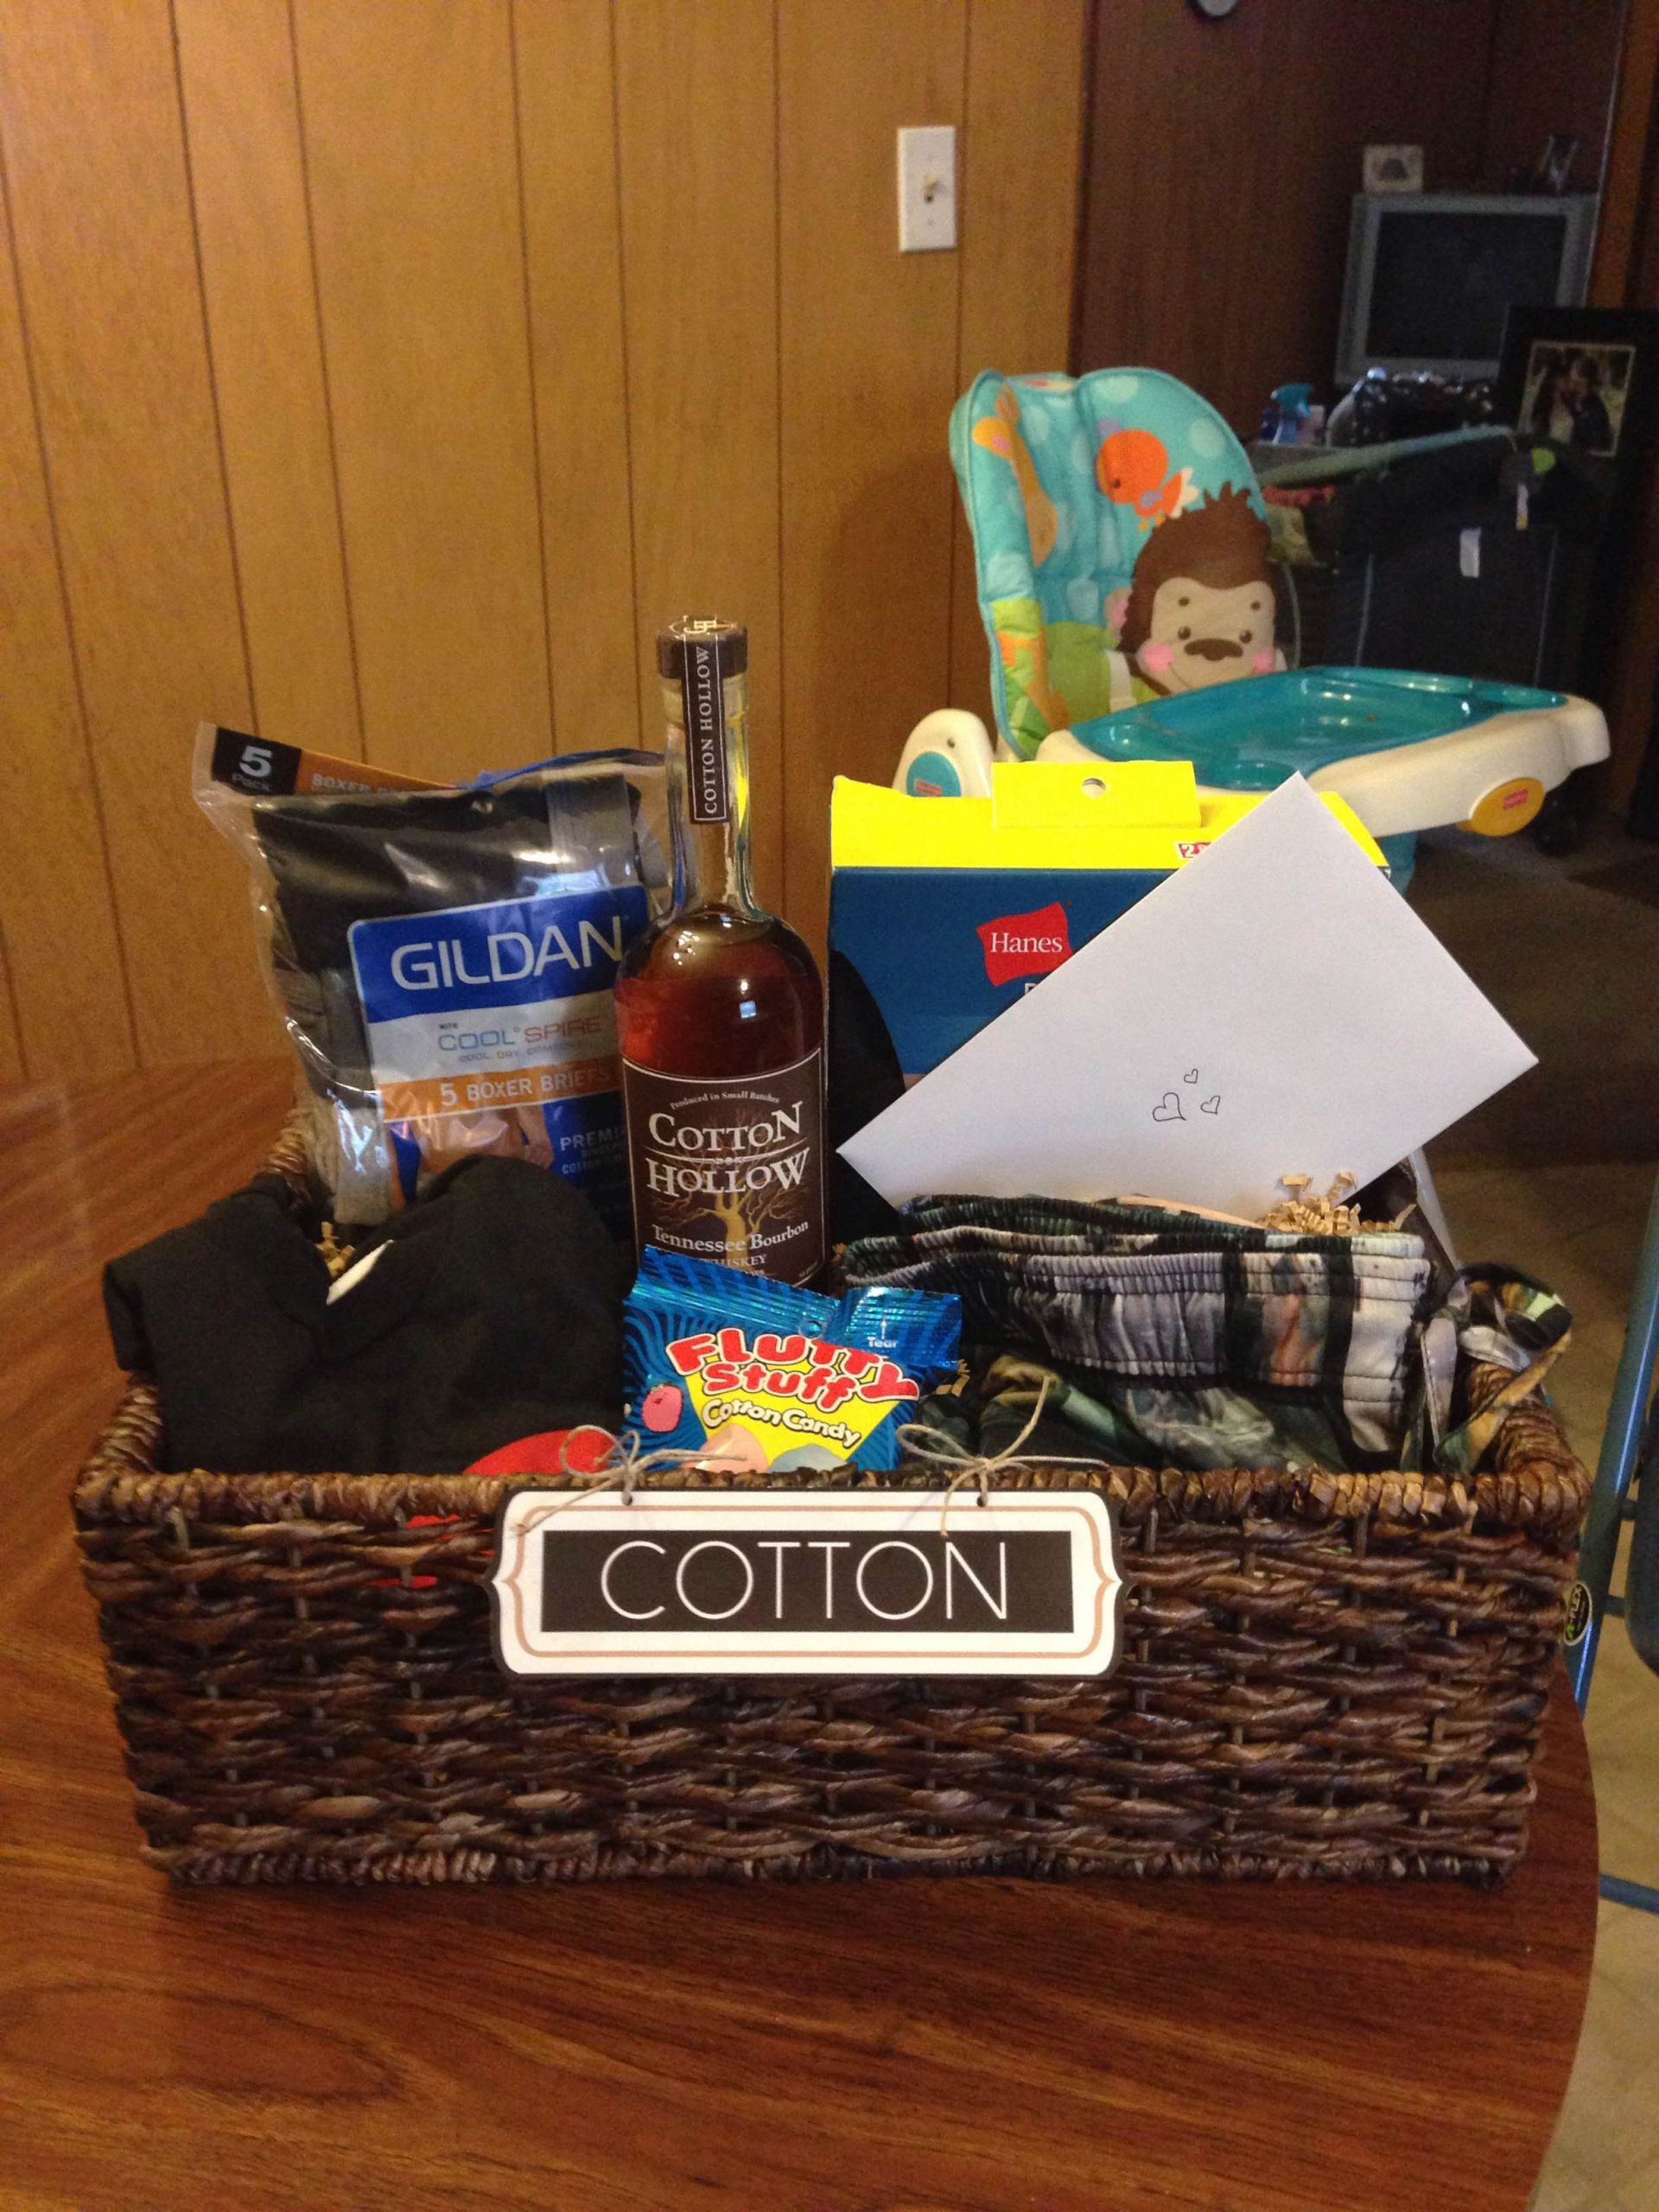 Cotton Anniversary Gift Ideas For Him
 "Cotton" t basket I put to her for my husband for our